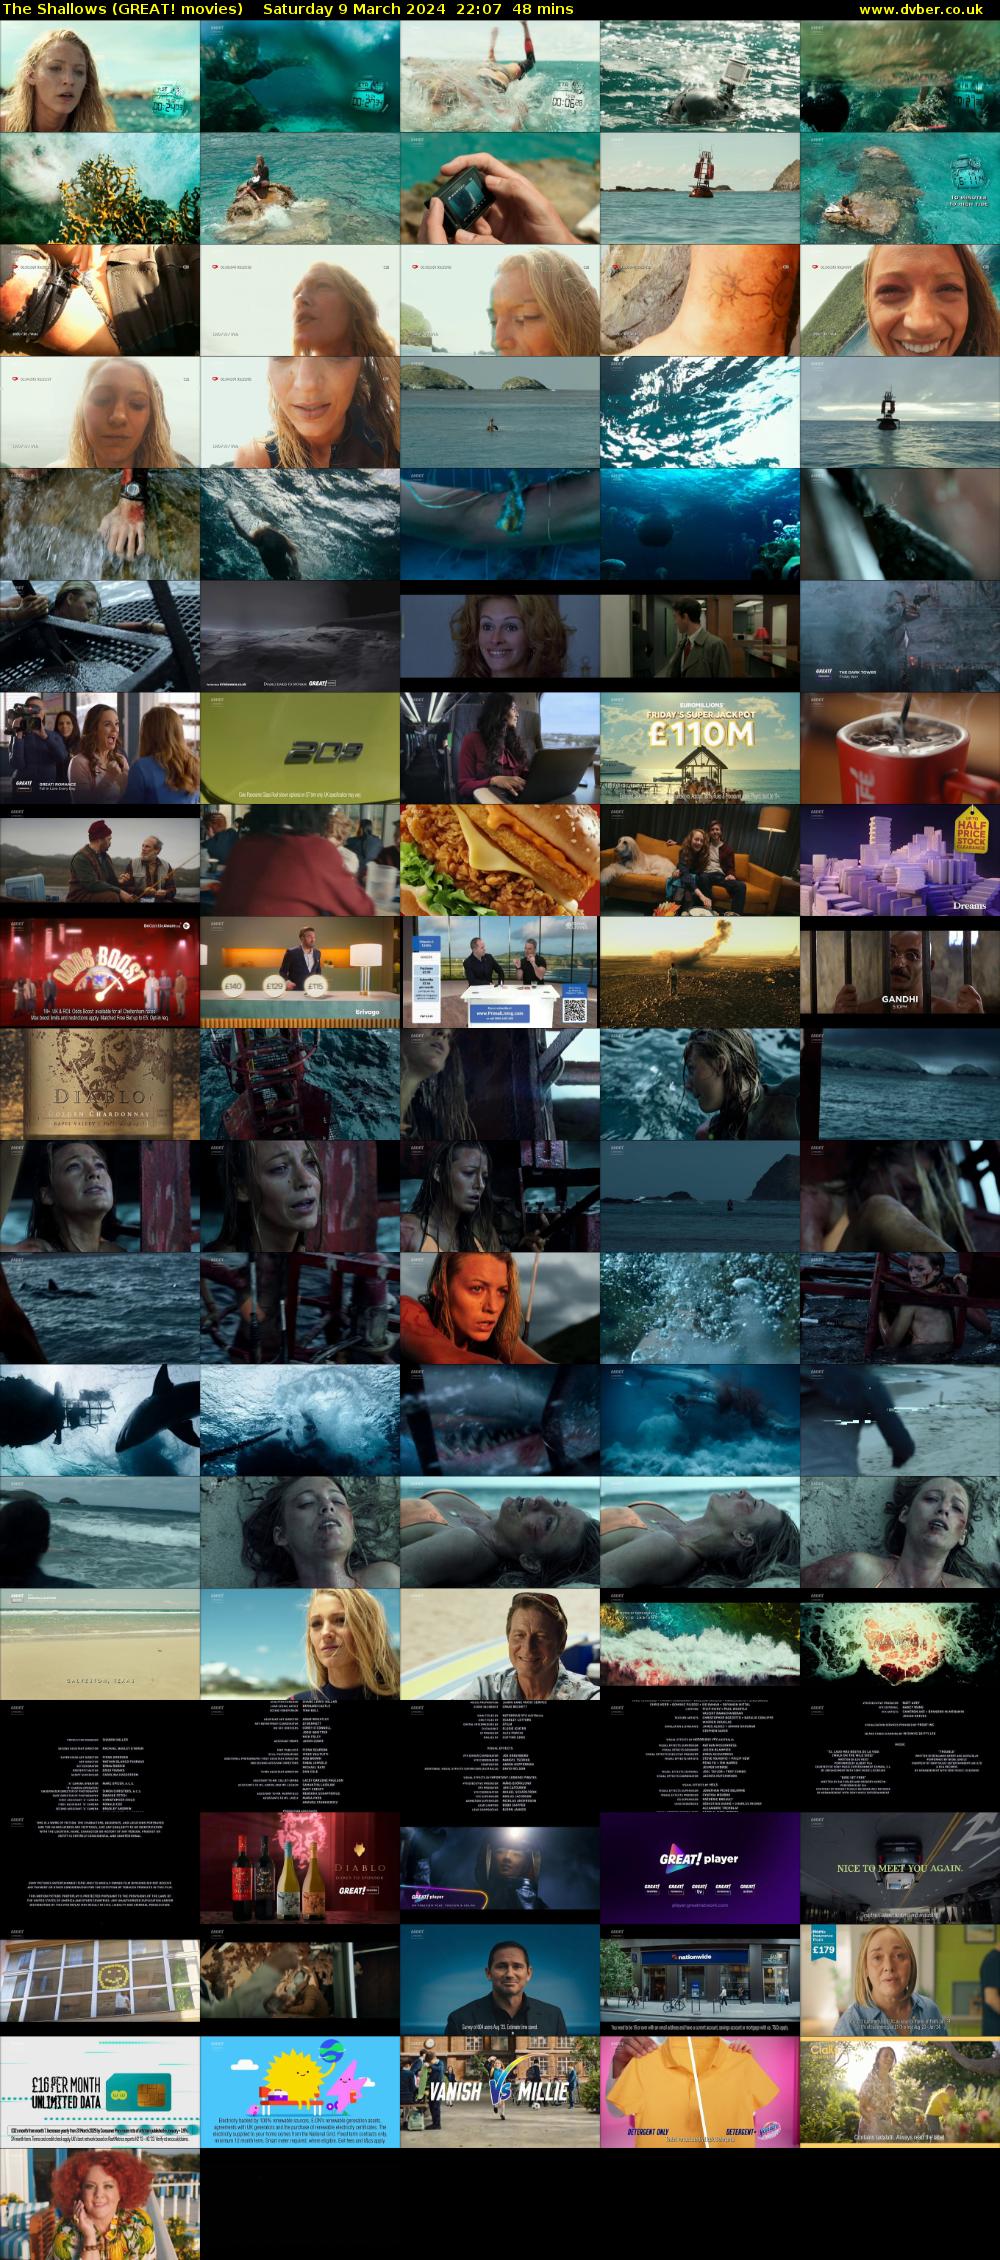 The Shallows (GREAT! movies) Saturday 9 March 2024 22:07 - 22:55